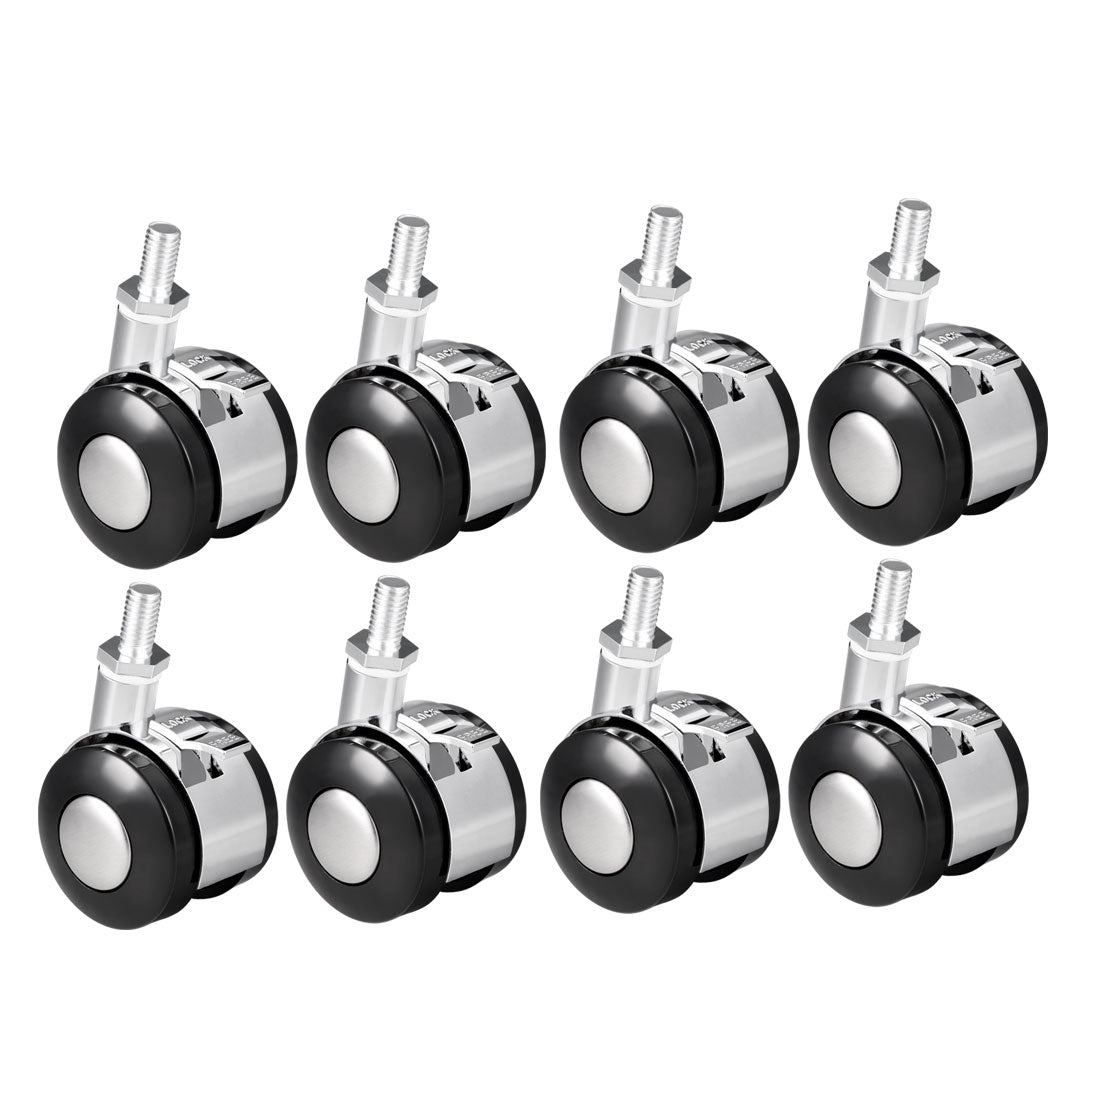 uxcell Uxcell Office Chair Casters Alloy Plastic 1.5 Inch Twin Wheel with Brake, M8 x 15mm Threaded Stem Swivel Caster, 33lb Load Capacity, 8Pcs